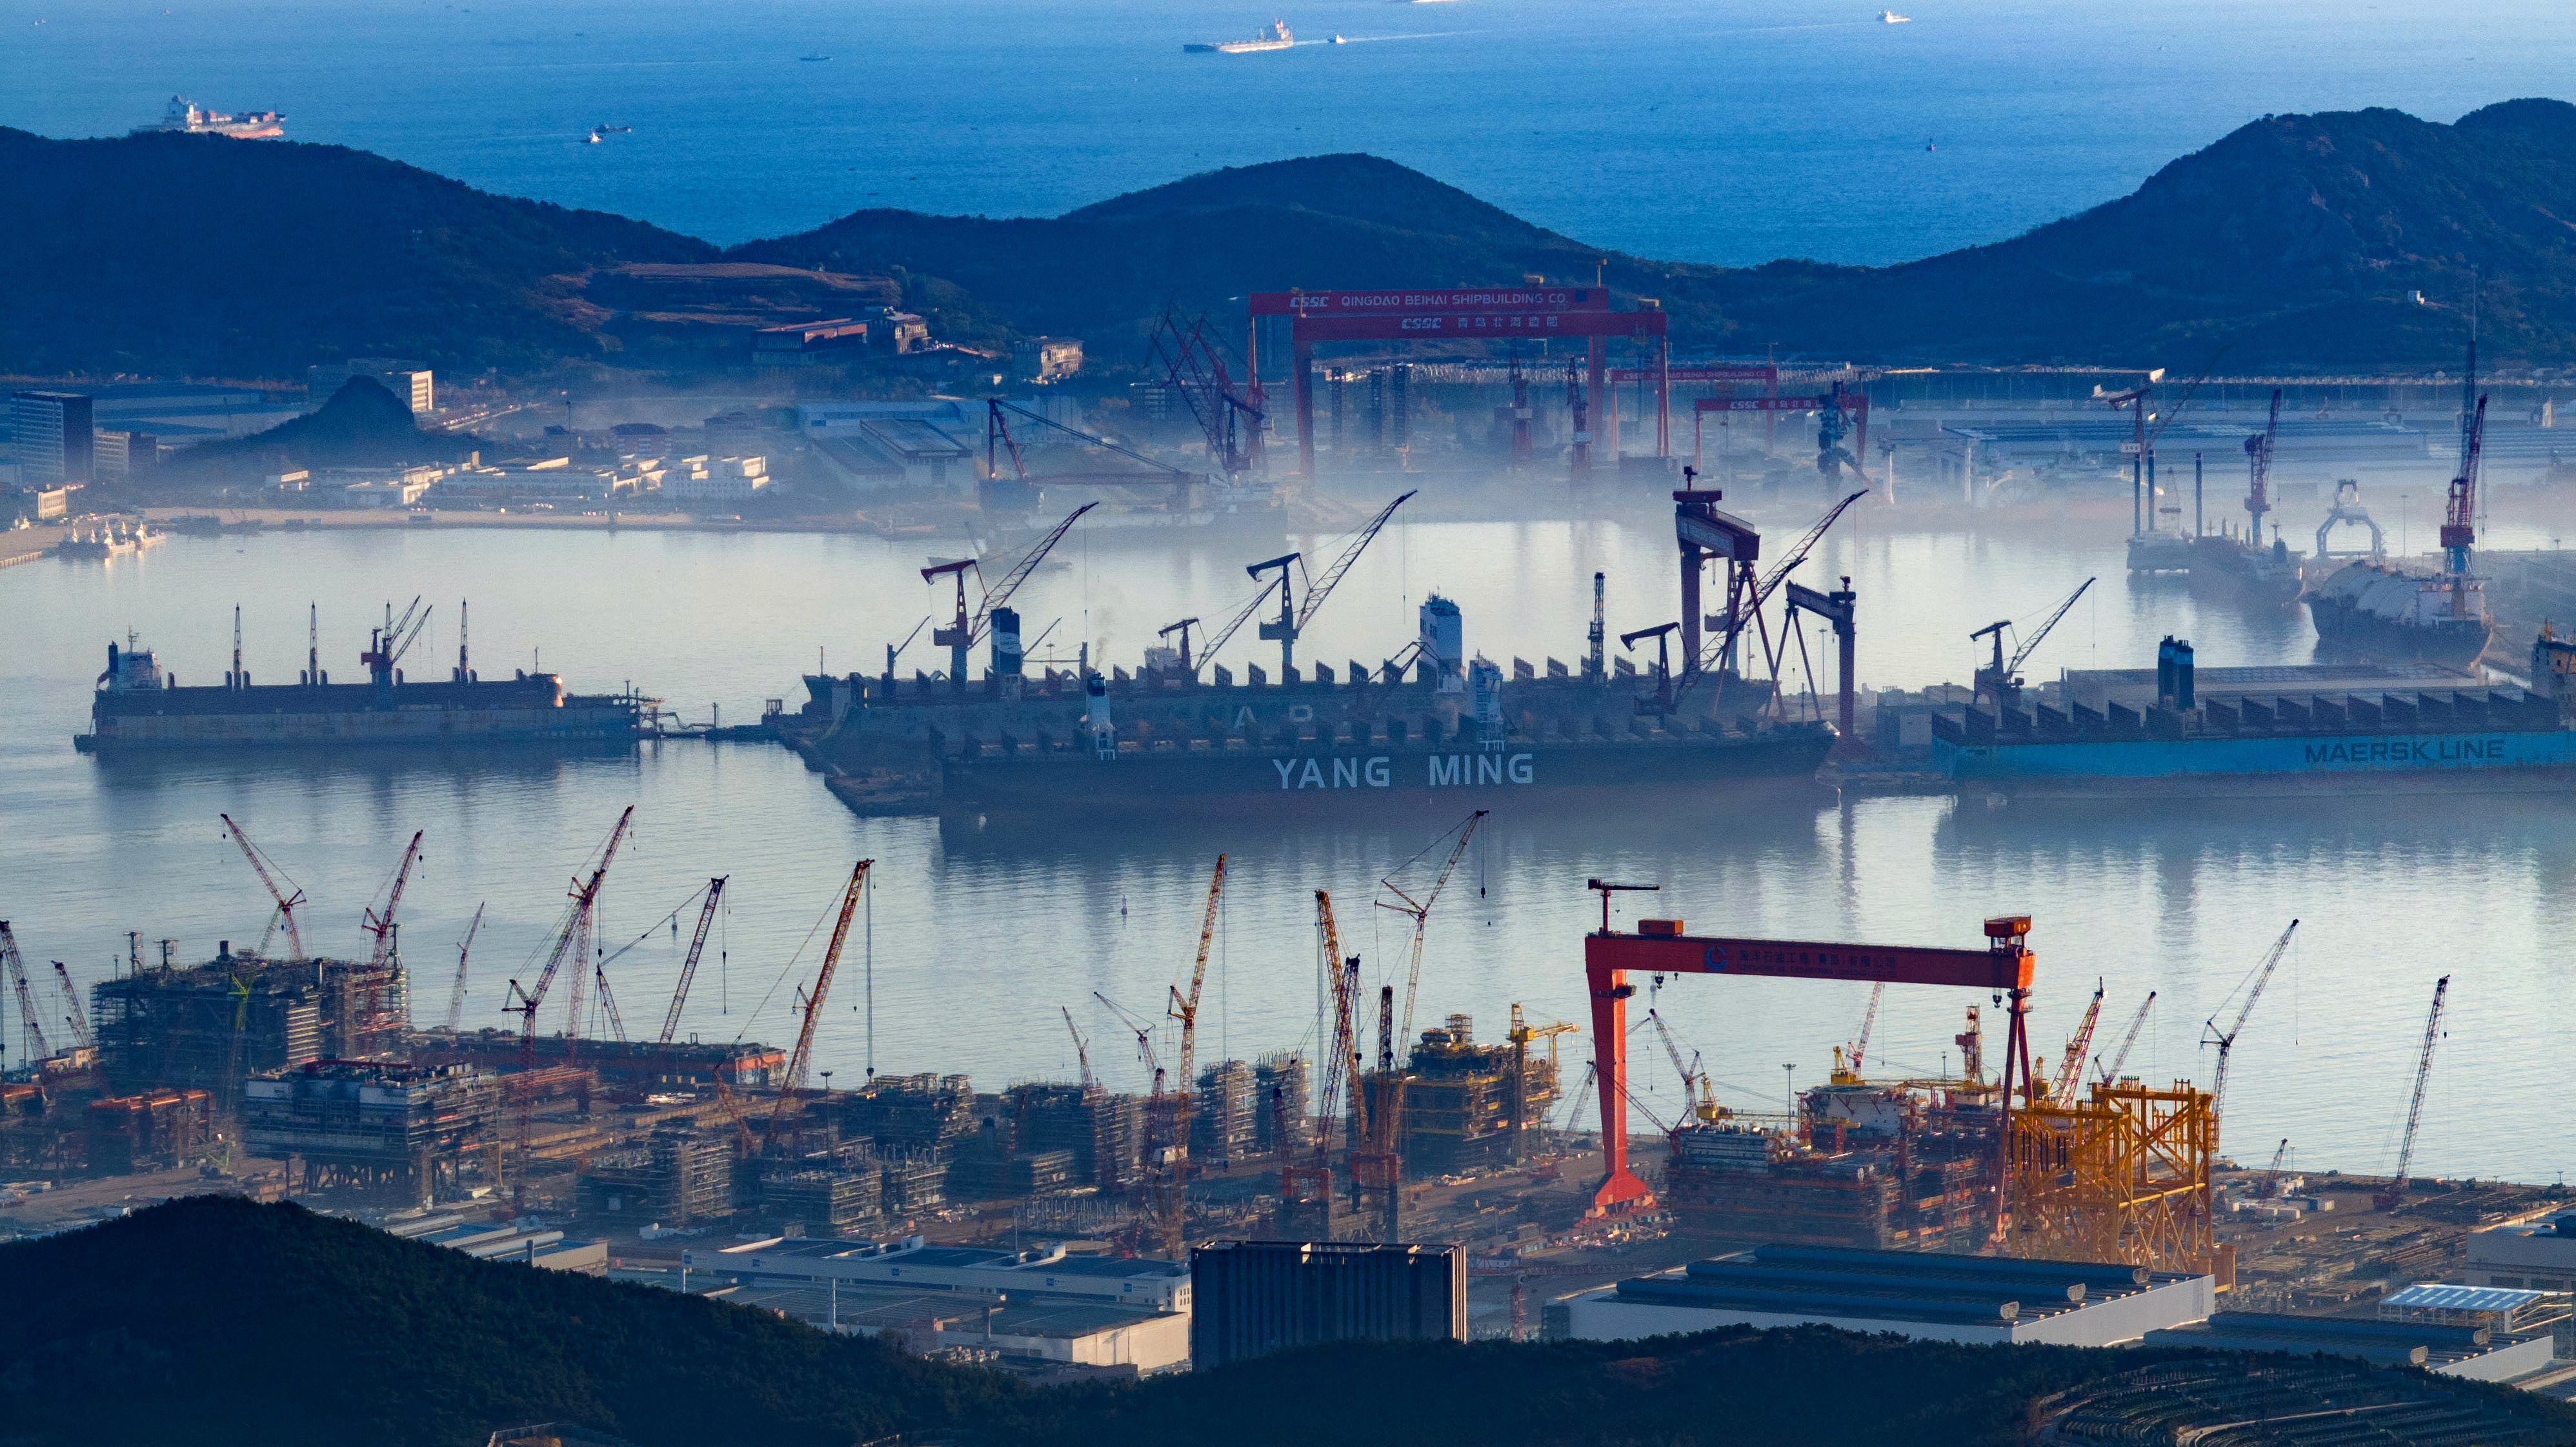 China’s marine economy is set to grow by leaps and bounds - and cooperation with neighbouring countries will only fuel further expansion. Photo: NurPhoto via Getty Images